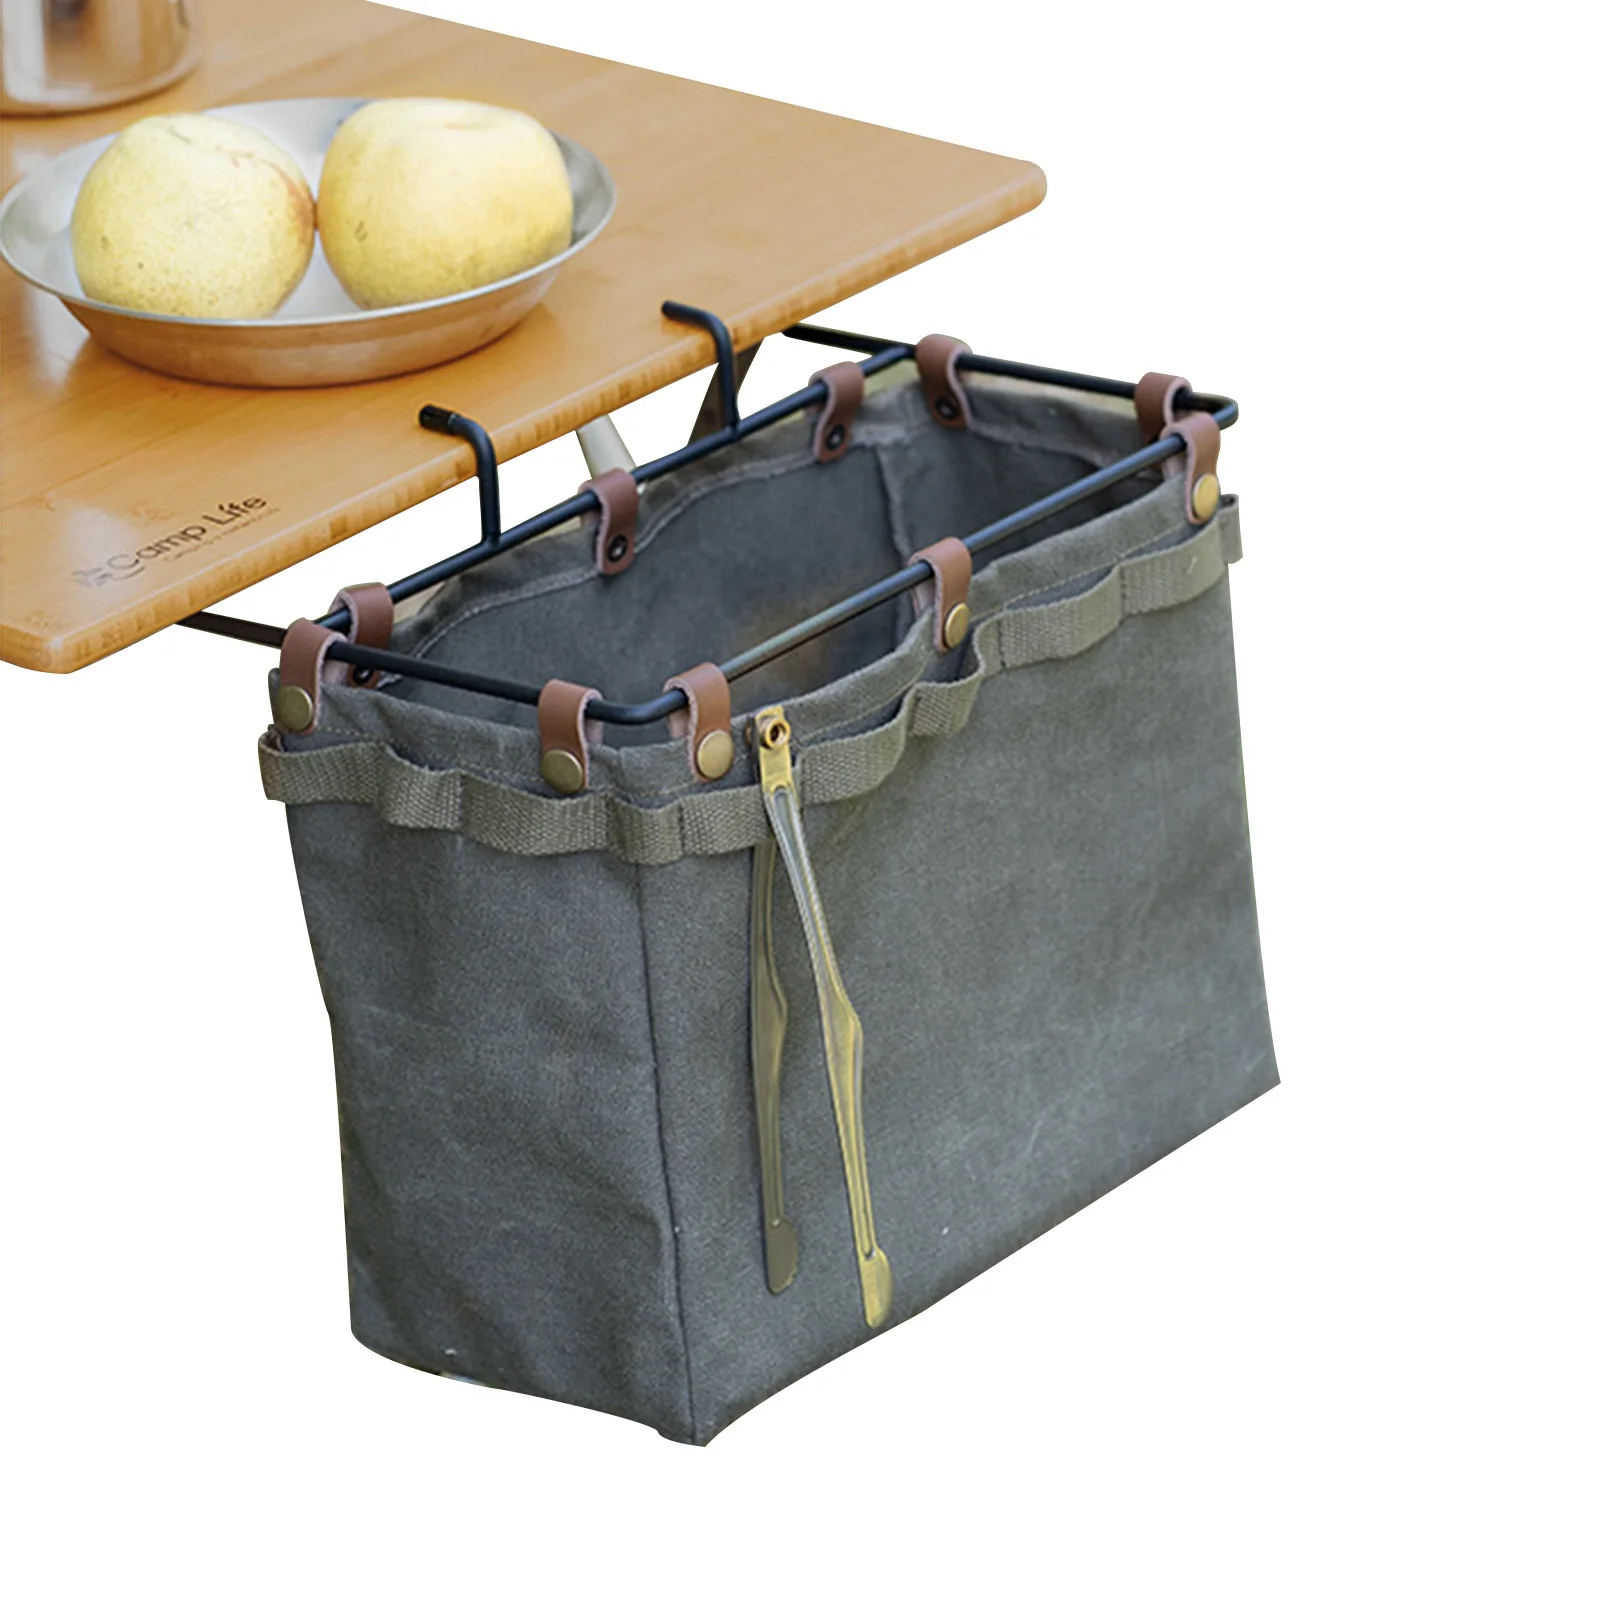 Desk Hangings Storage Bag Table Side Storage Bag Hangings Organizer For Table Foldable Storage Bag For Travel Or Daily Use